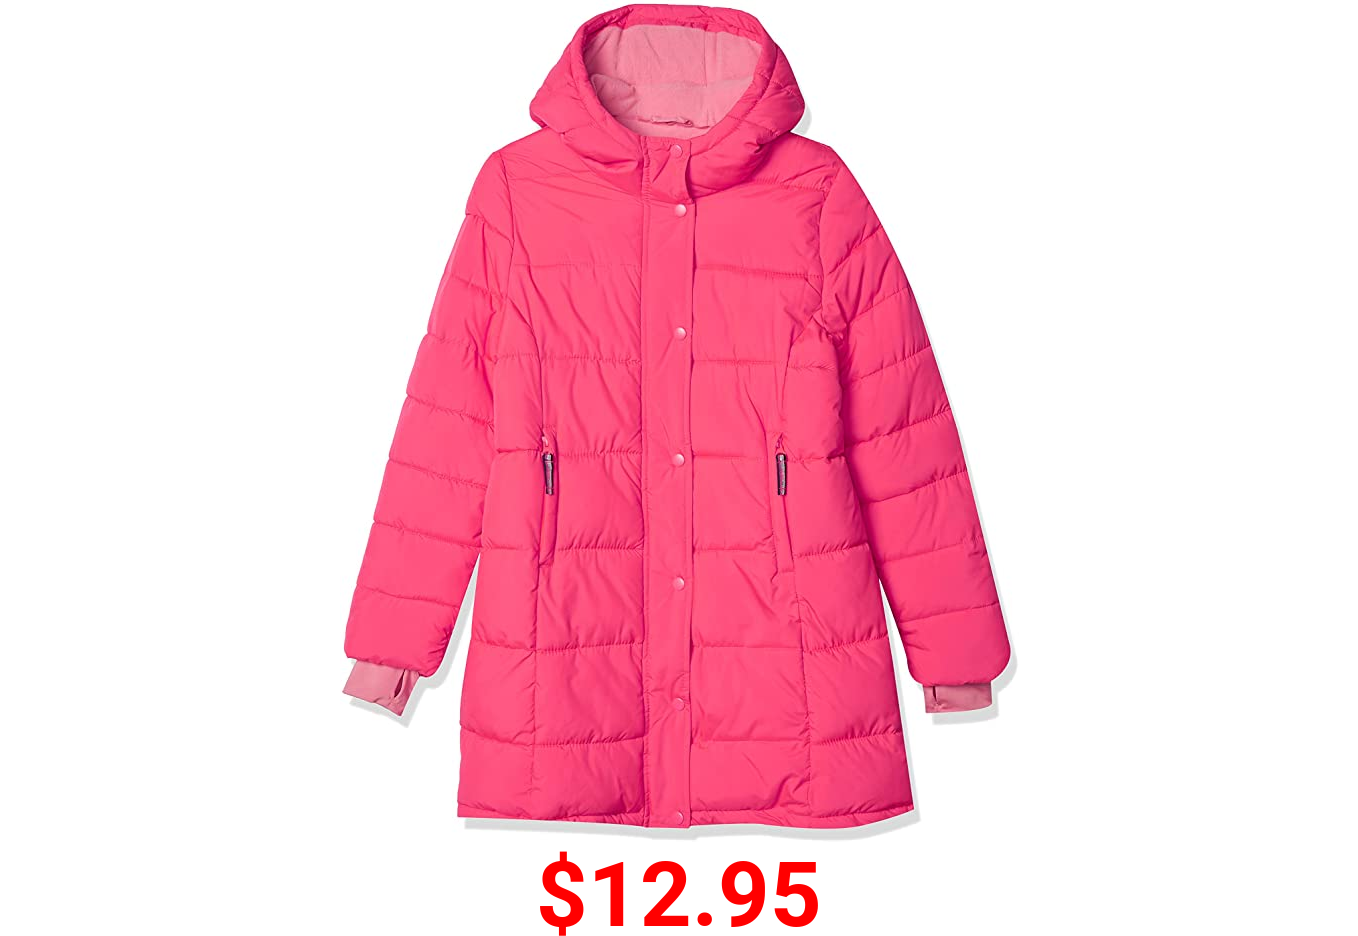 Amazon Essentials Girls and Toddlers' Long Heavy-Weight Hooded Puffer Jacket